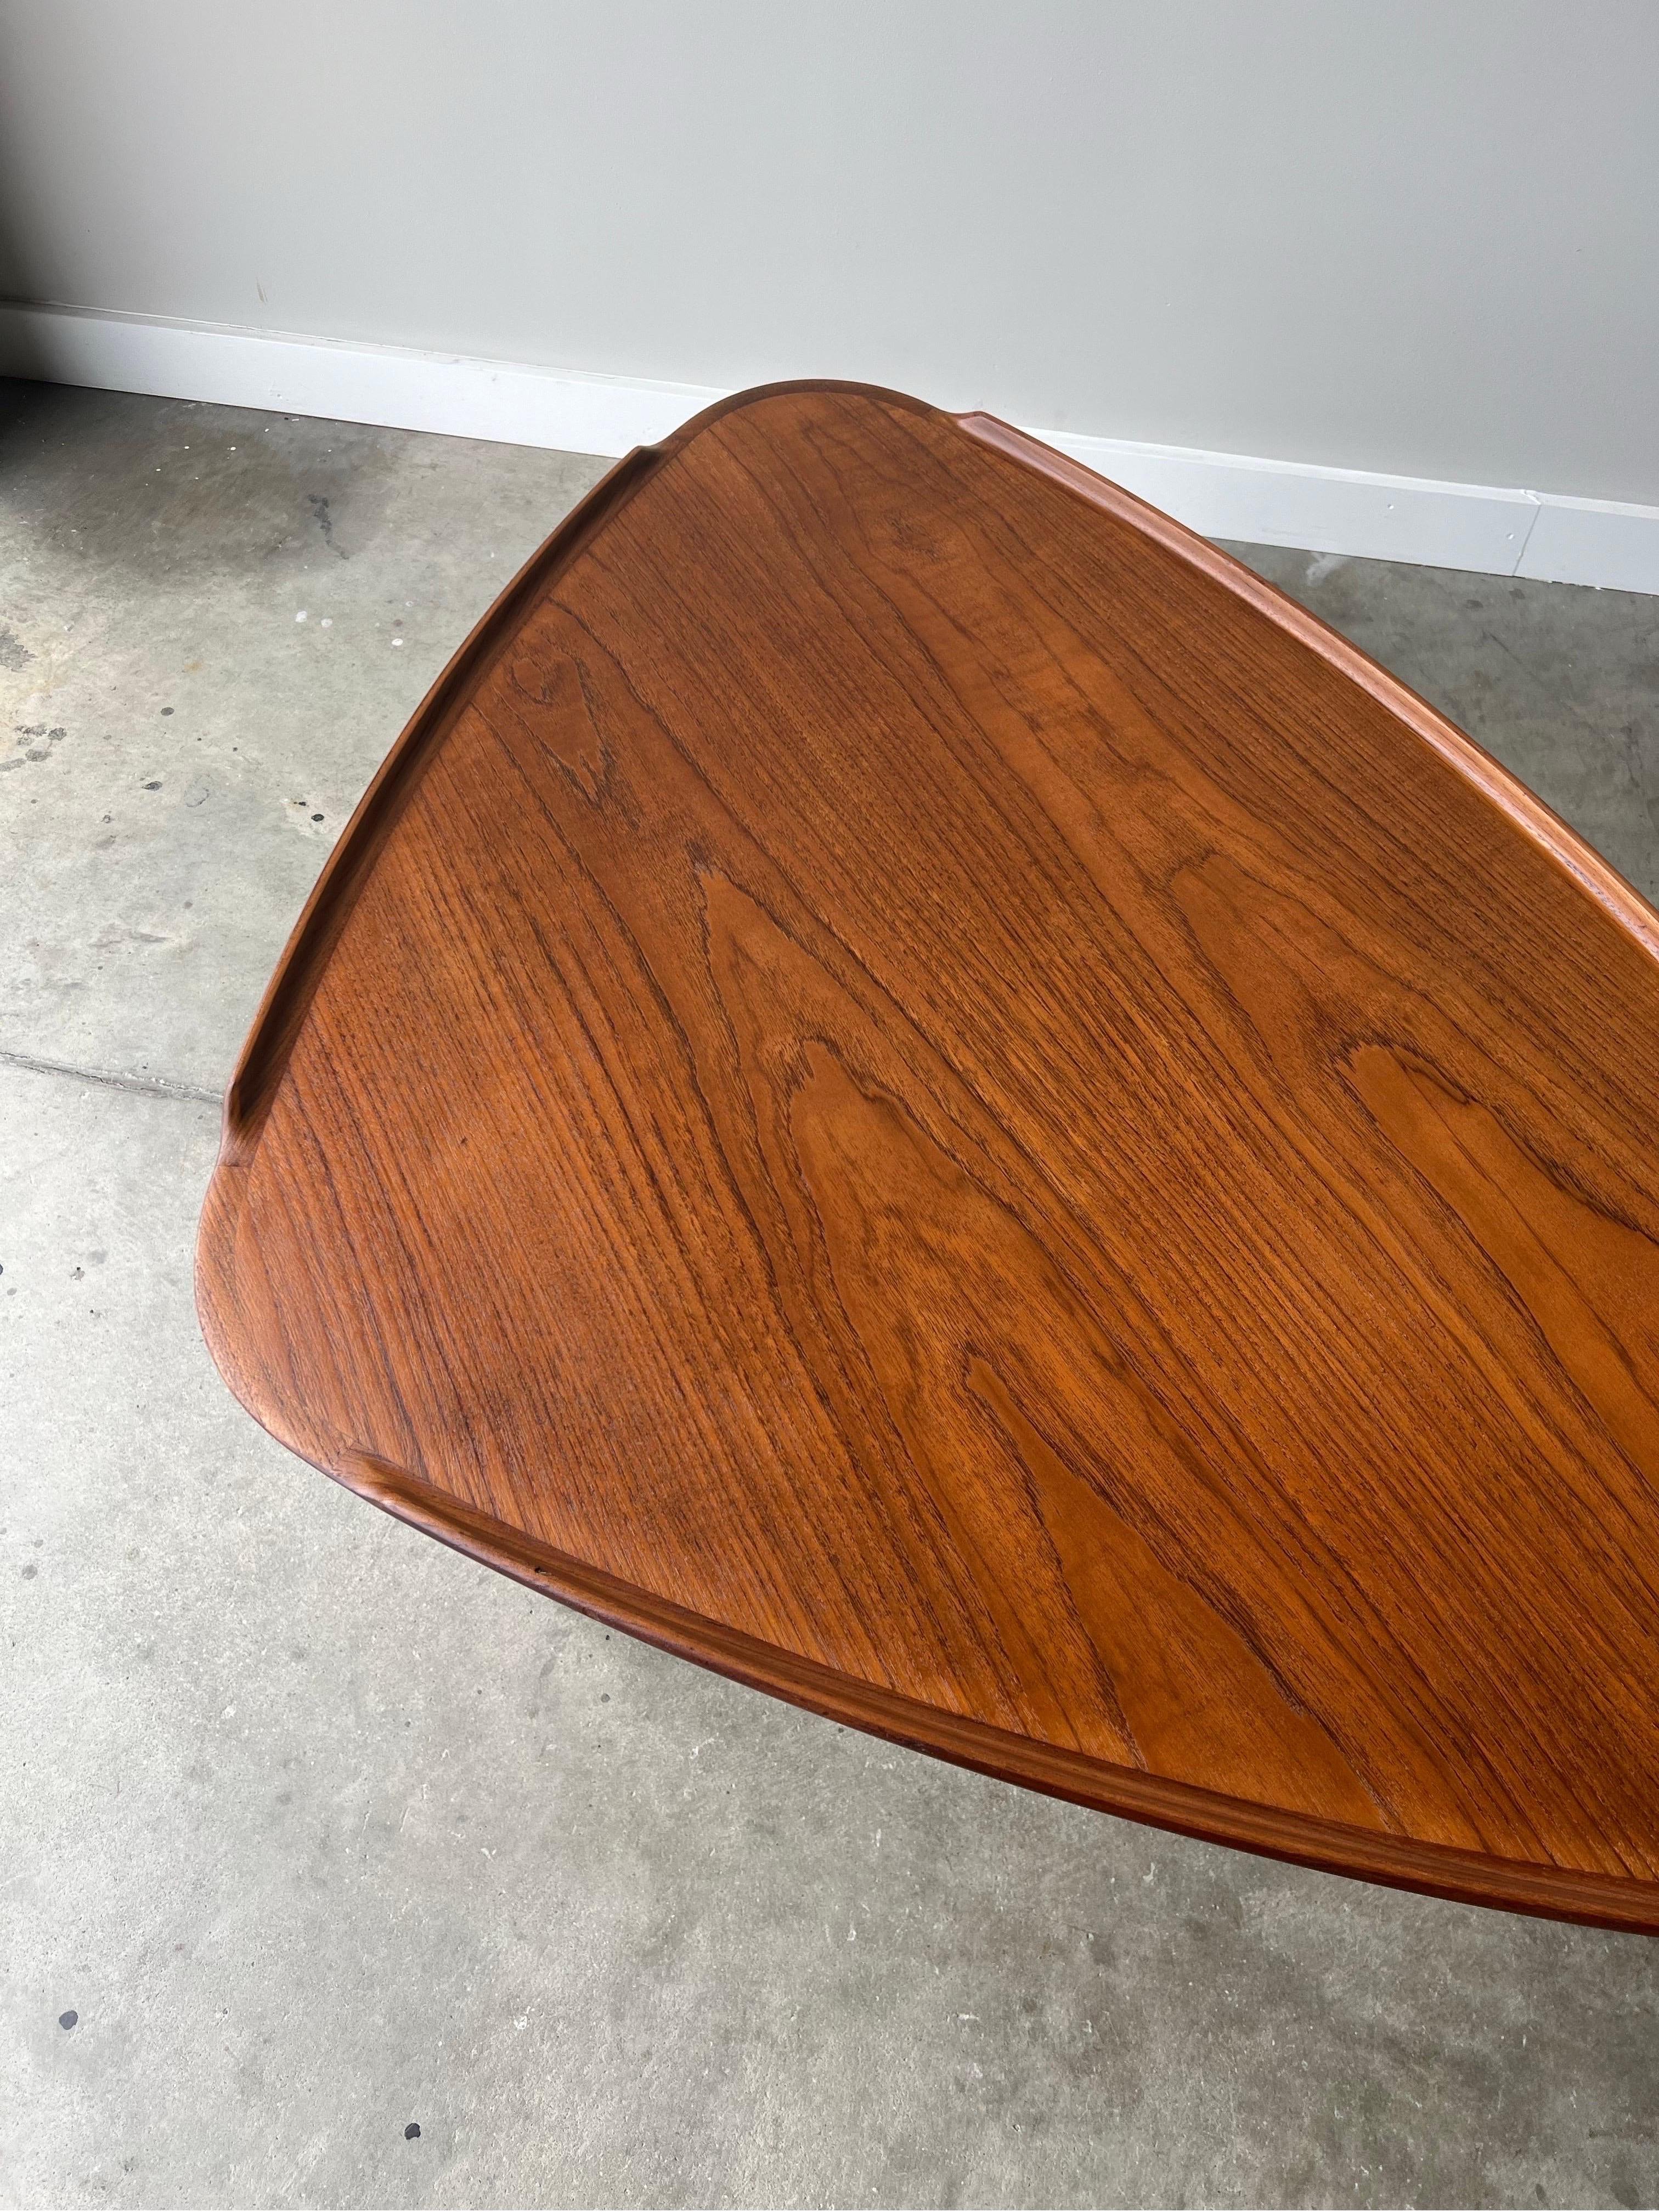 Aakjaer Jorgensen Danish Teak Triangular Coffee Table In Good Condition For Sale In Raleigh, NC